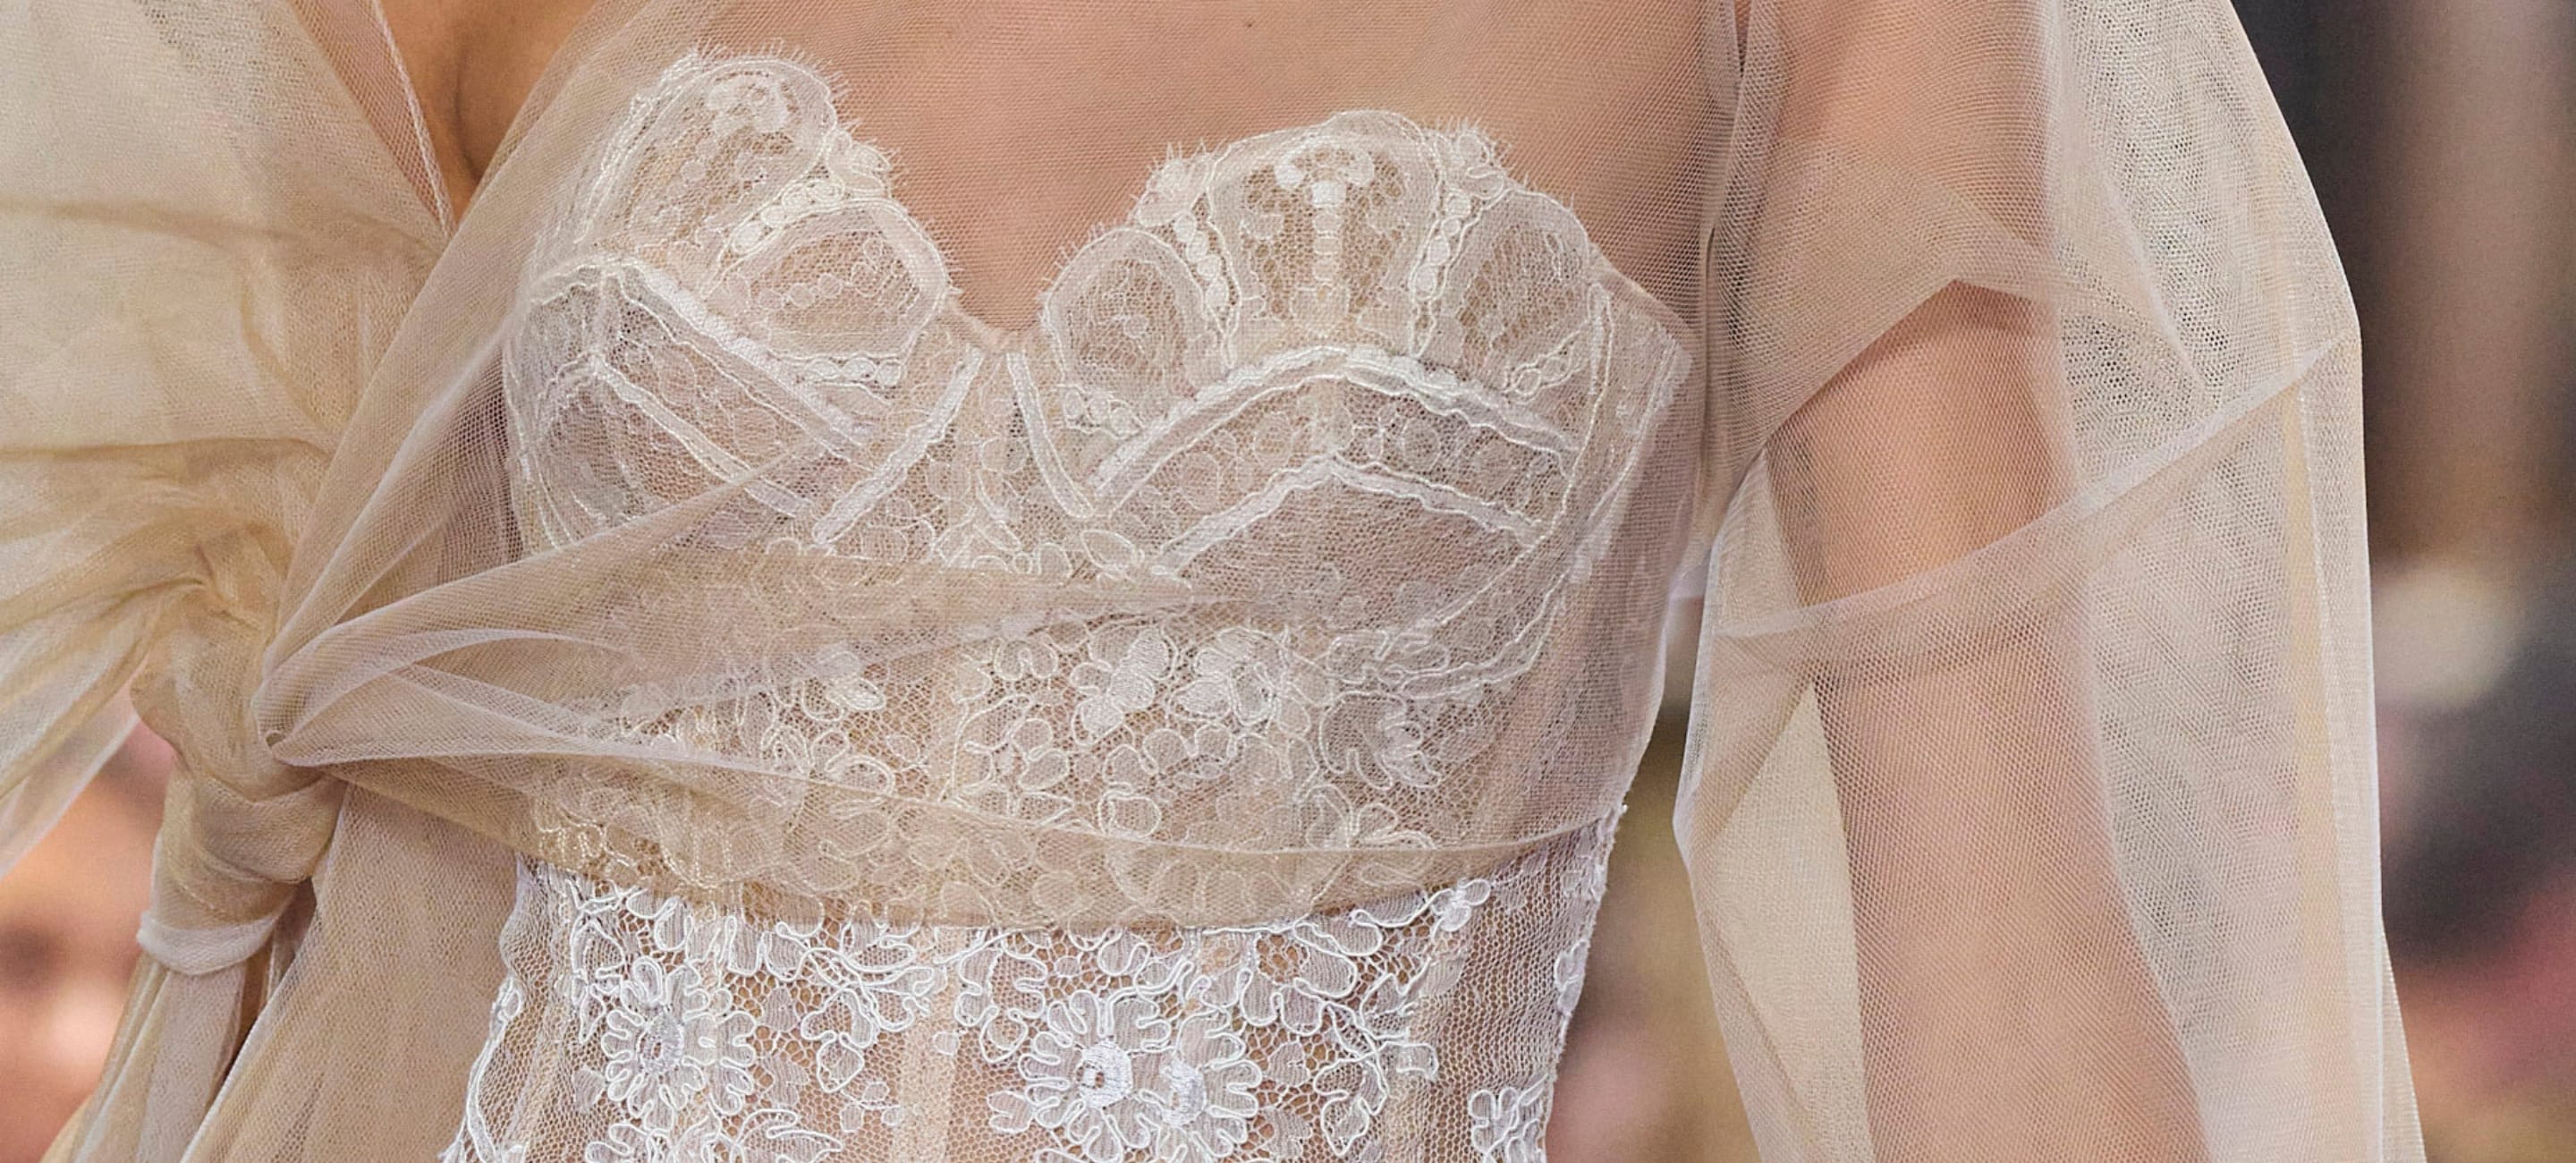 High-End Lingerie: Top 7 Brands & Beautiful Pieces